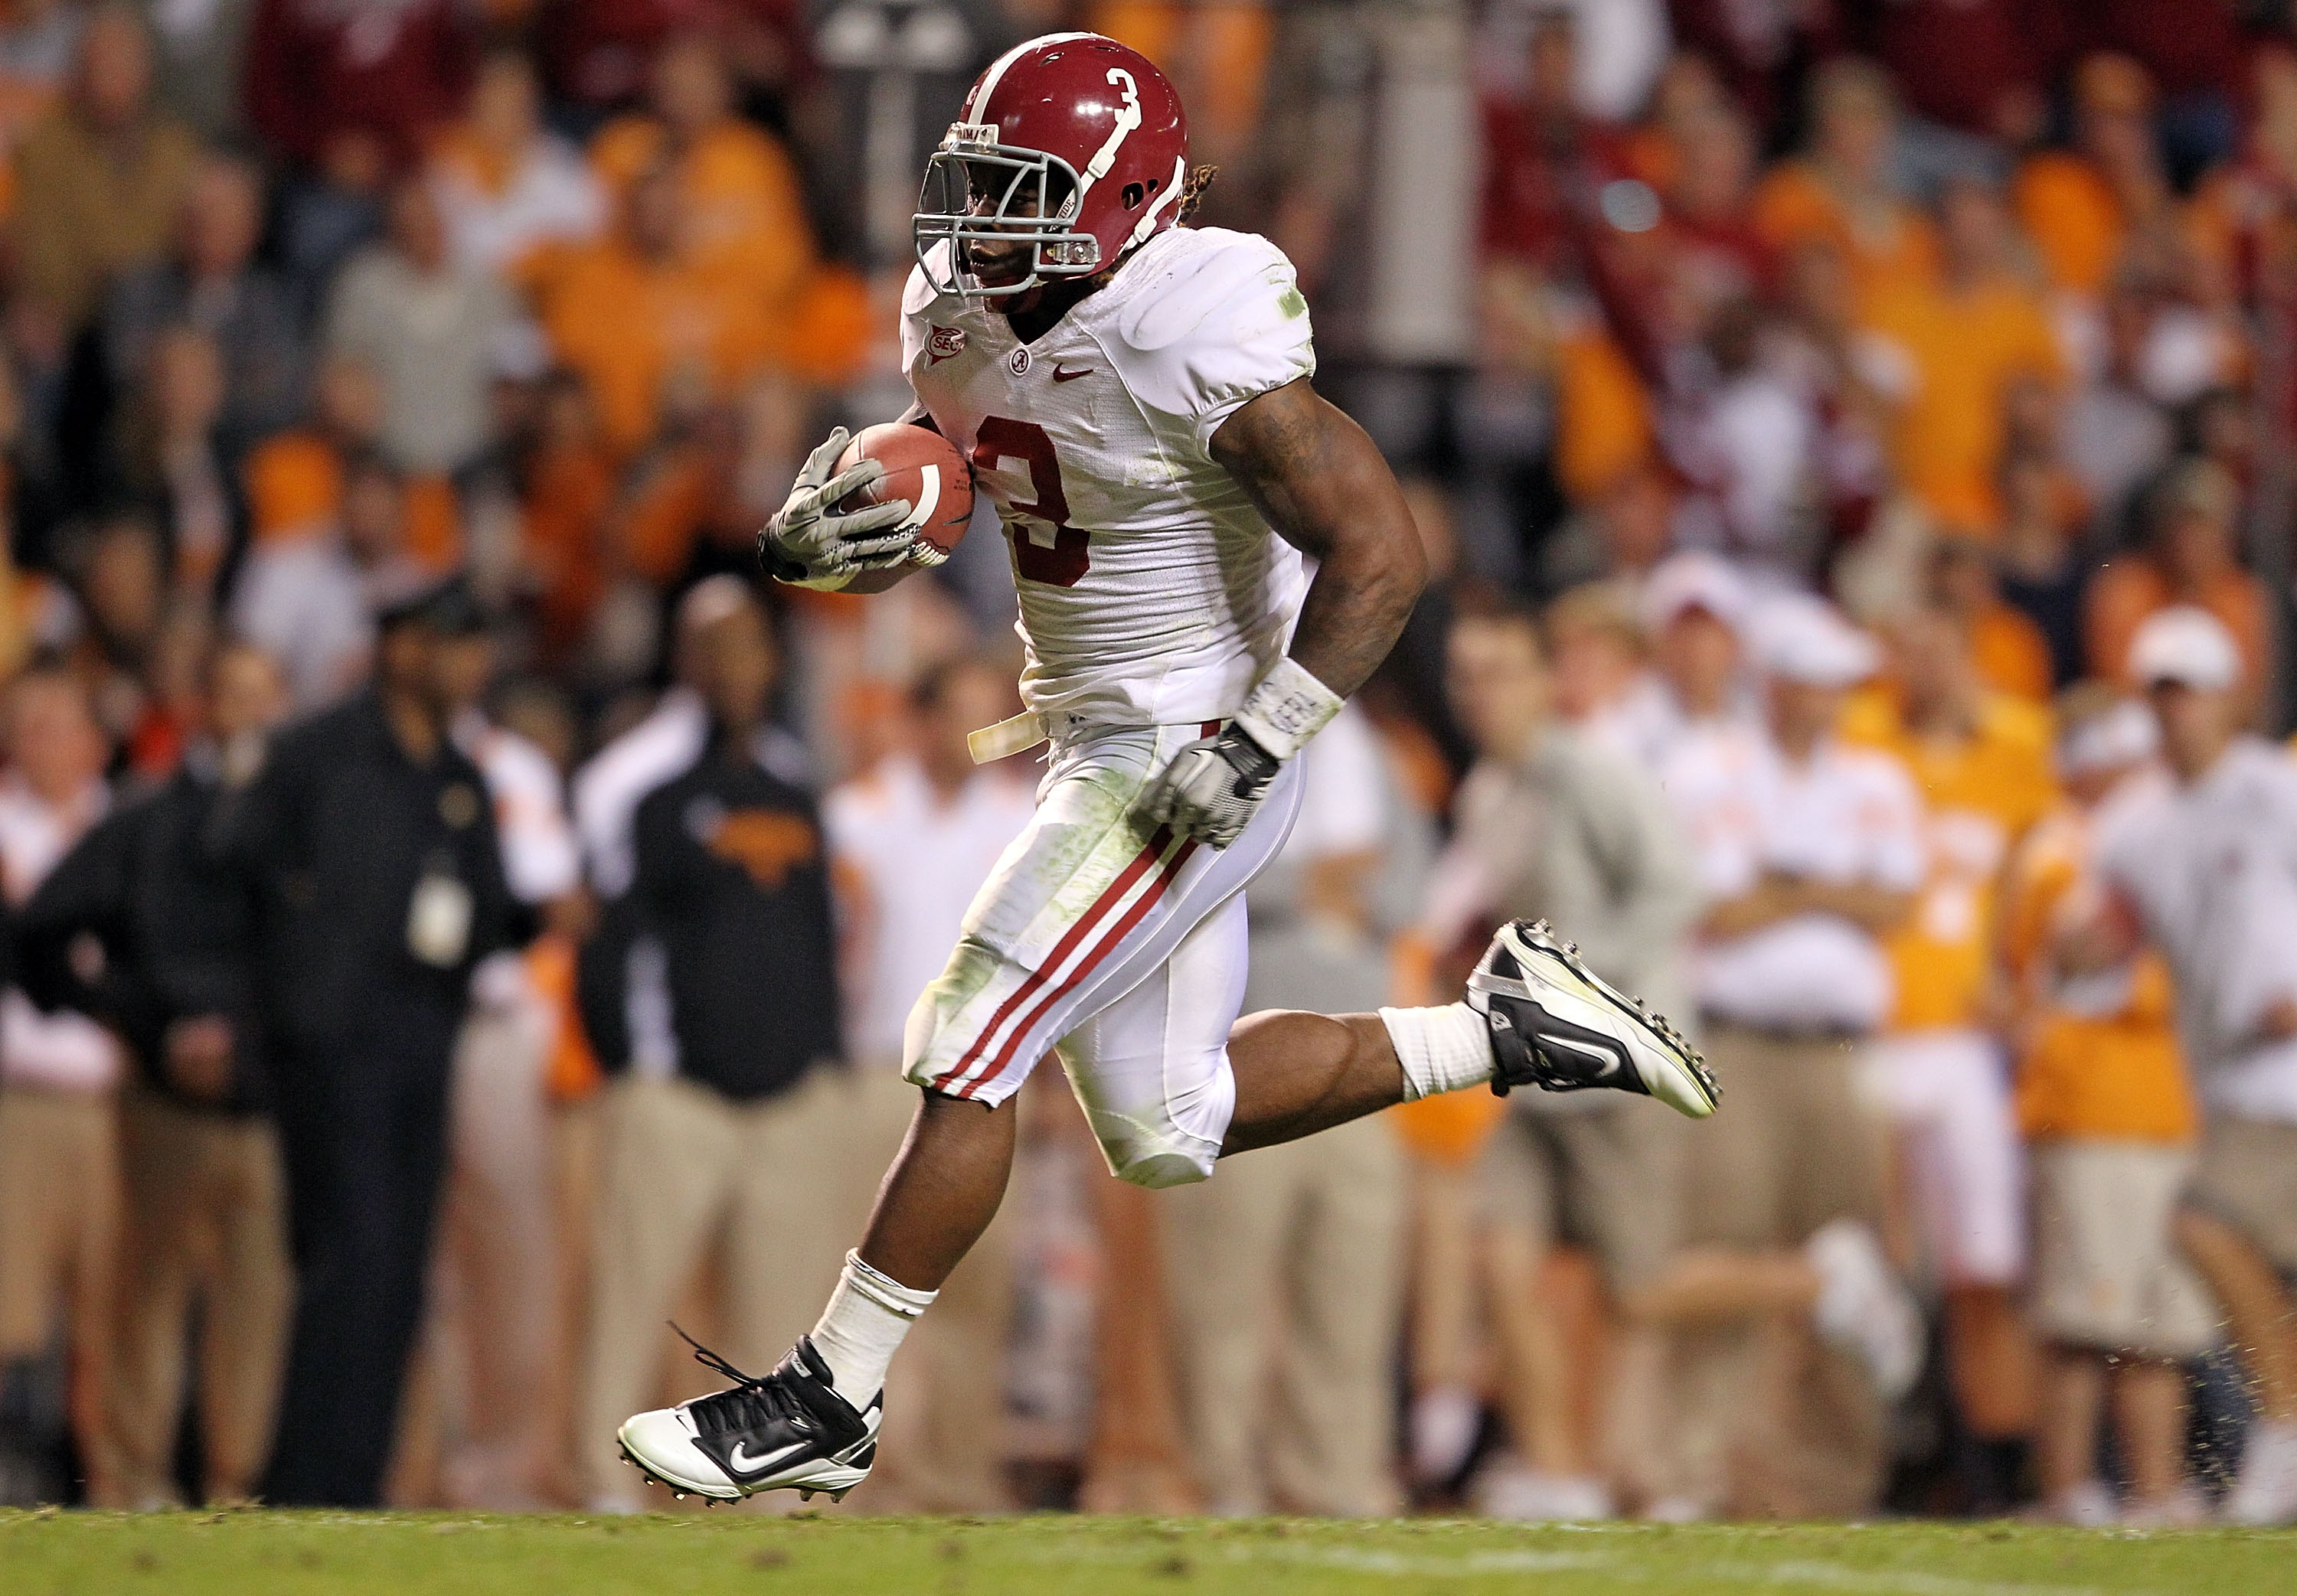 KNOXVILLE, TN - OCTOBER 23:  Trent Richardson #3 of the Alabama Crimson Tide runs for a touchdown during the SEC game against the Tennessee Volunteers at Neyland Stadium on October 23, 2010 in Knoxville, Tennessee.  (Photo by Andy Lyons/Getty Images)